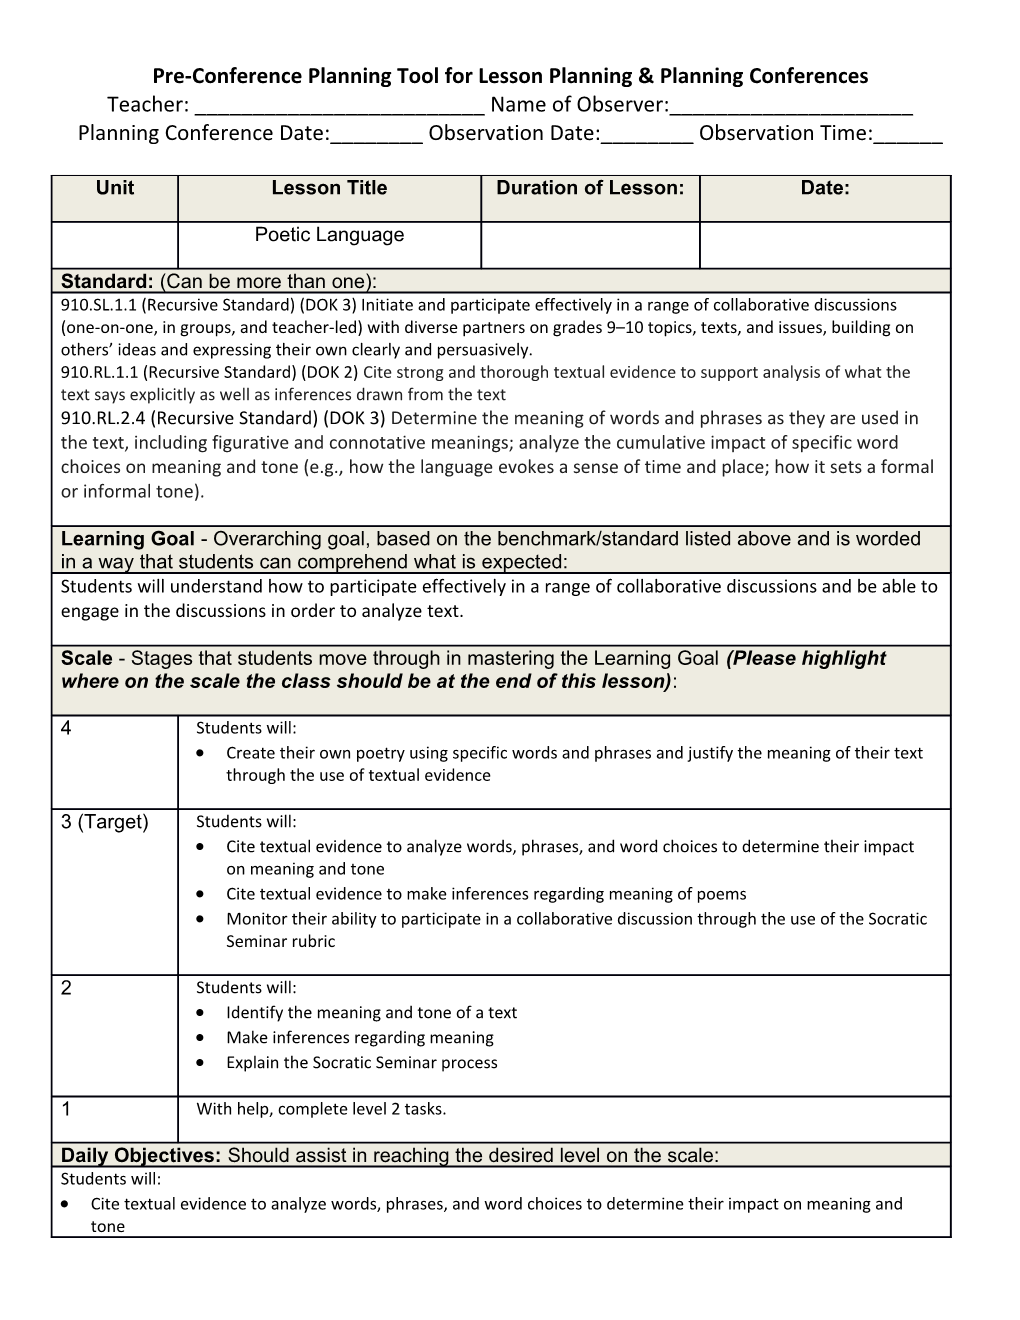 Pre-Conference Planning Tool for Lesson Planning & Planning Conferences